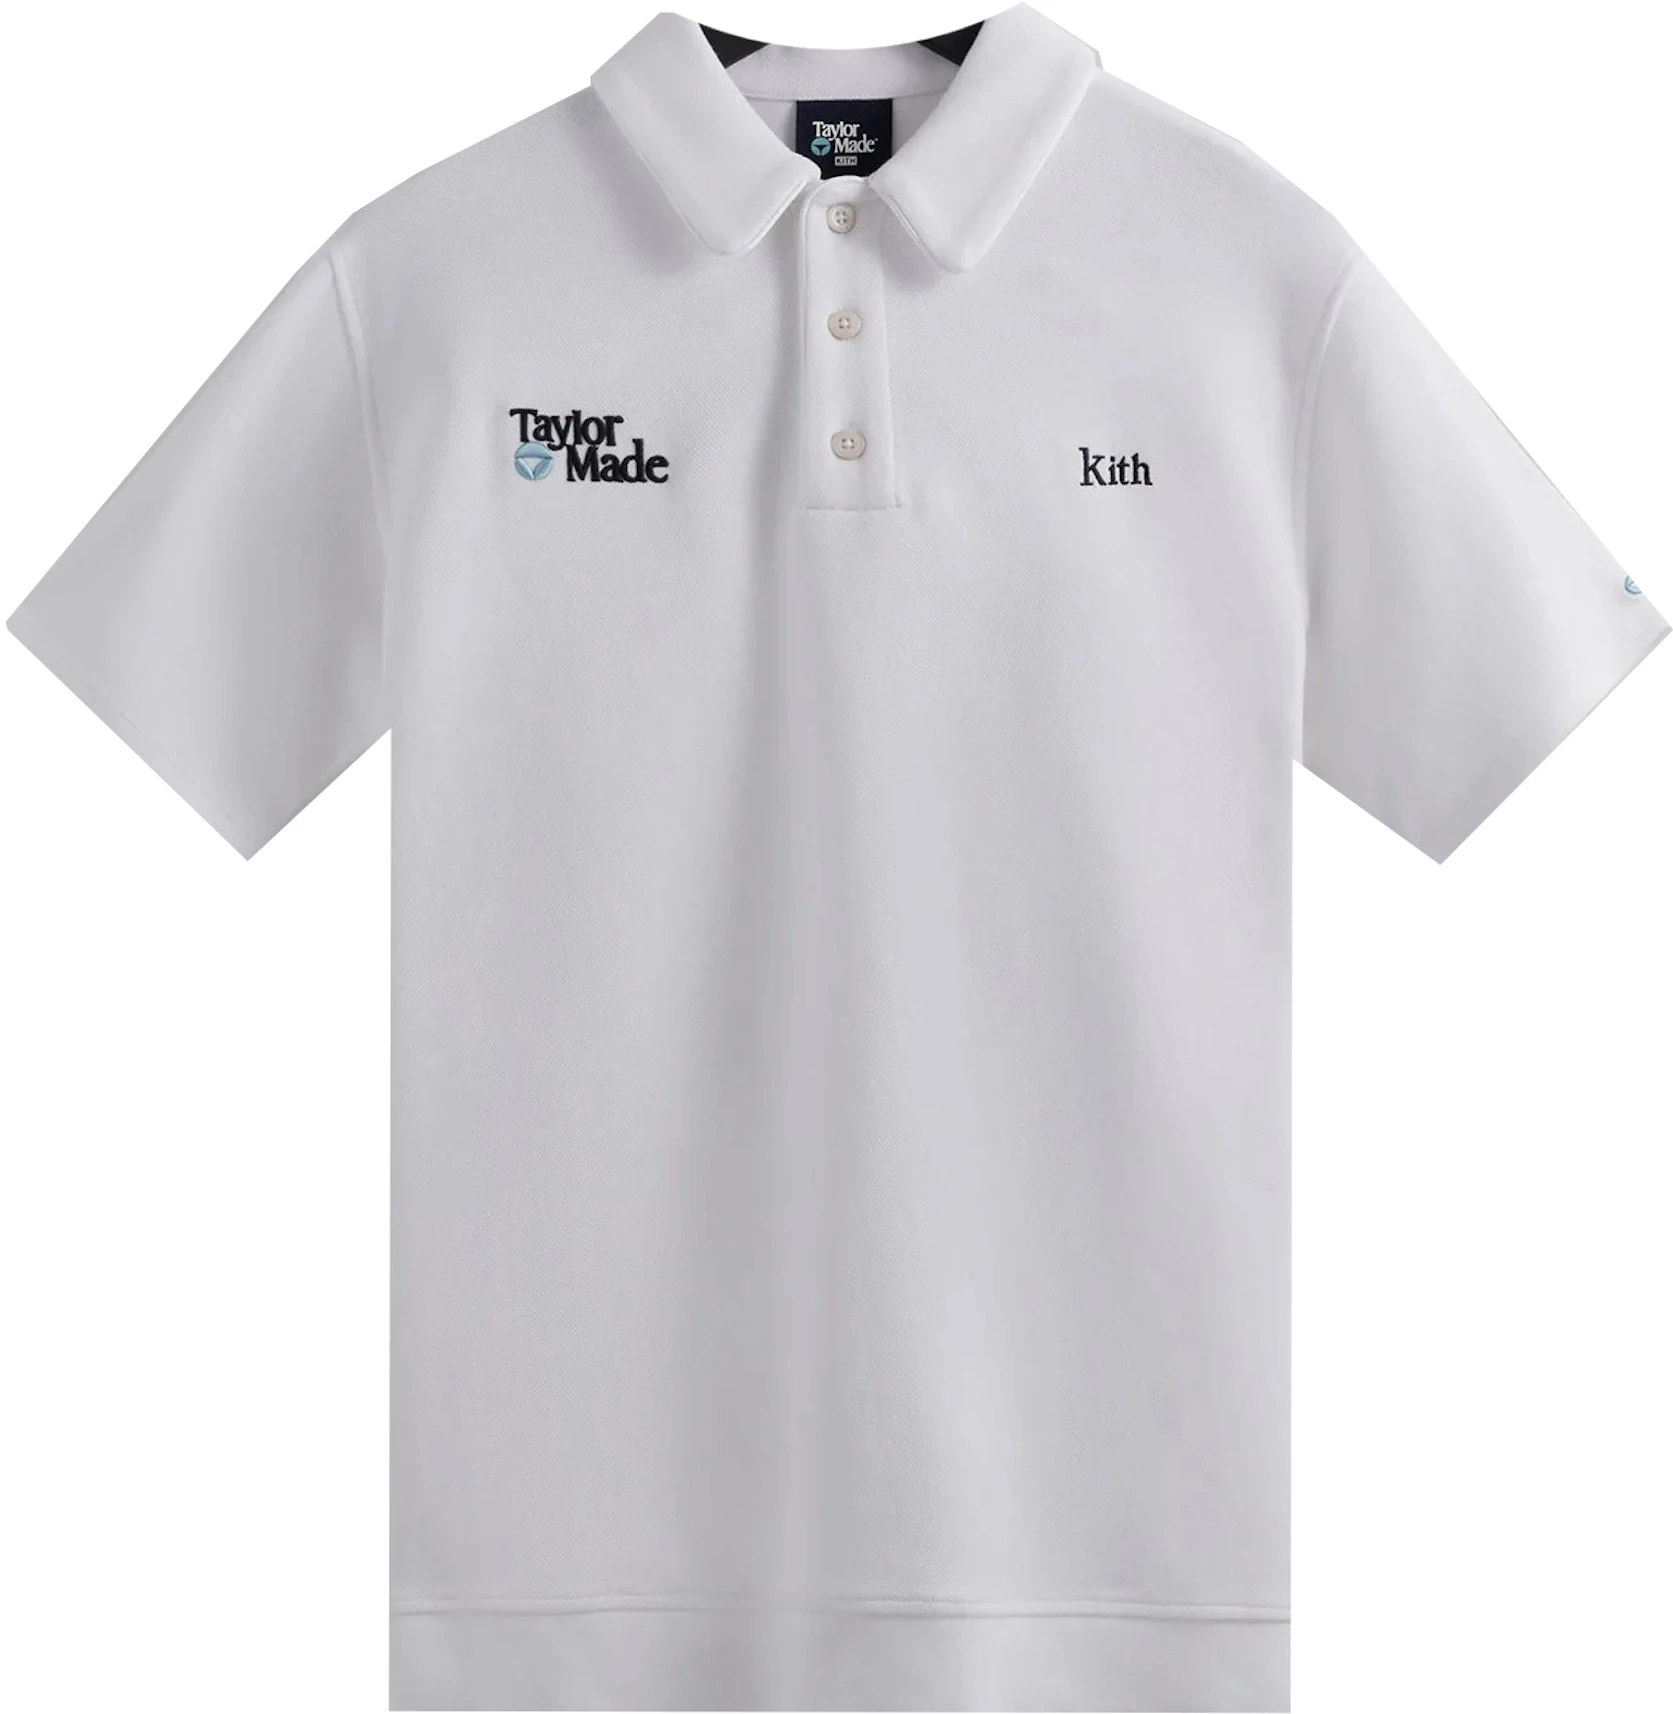 Wortel Helm rechtbank Kith TaylorMade The Turn Polo White - SS22 - US